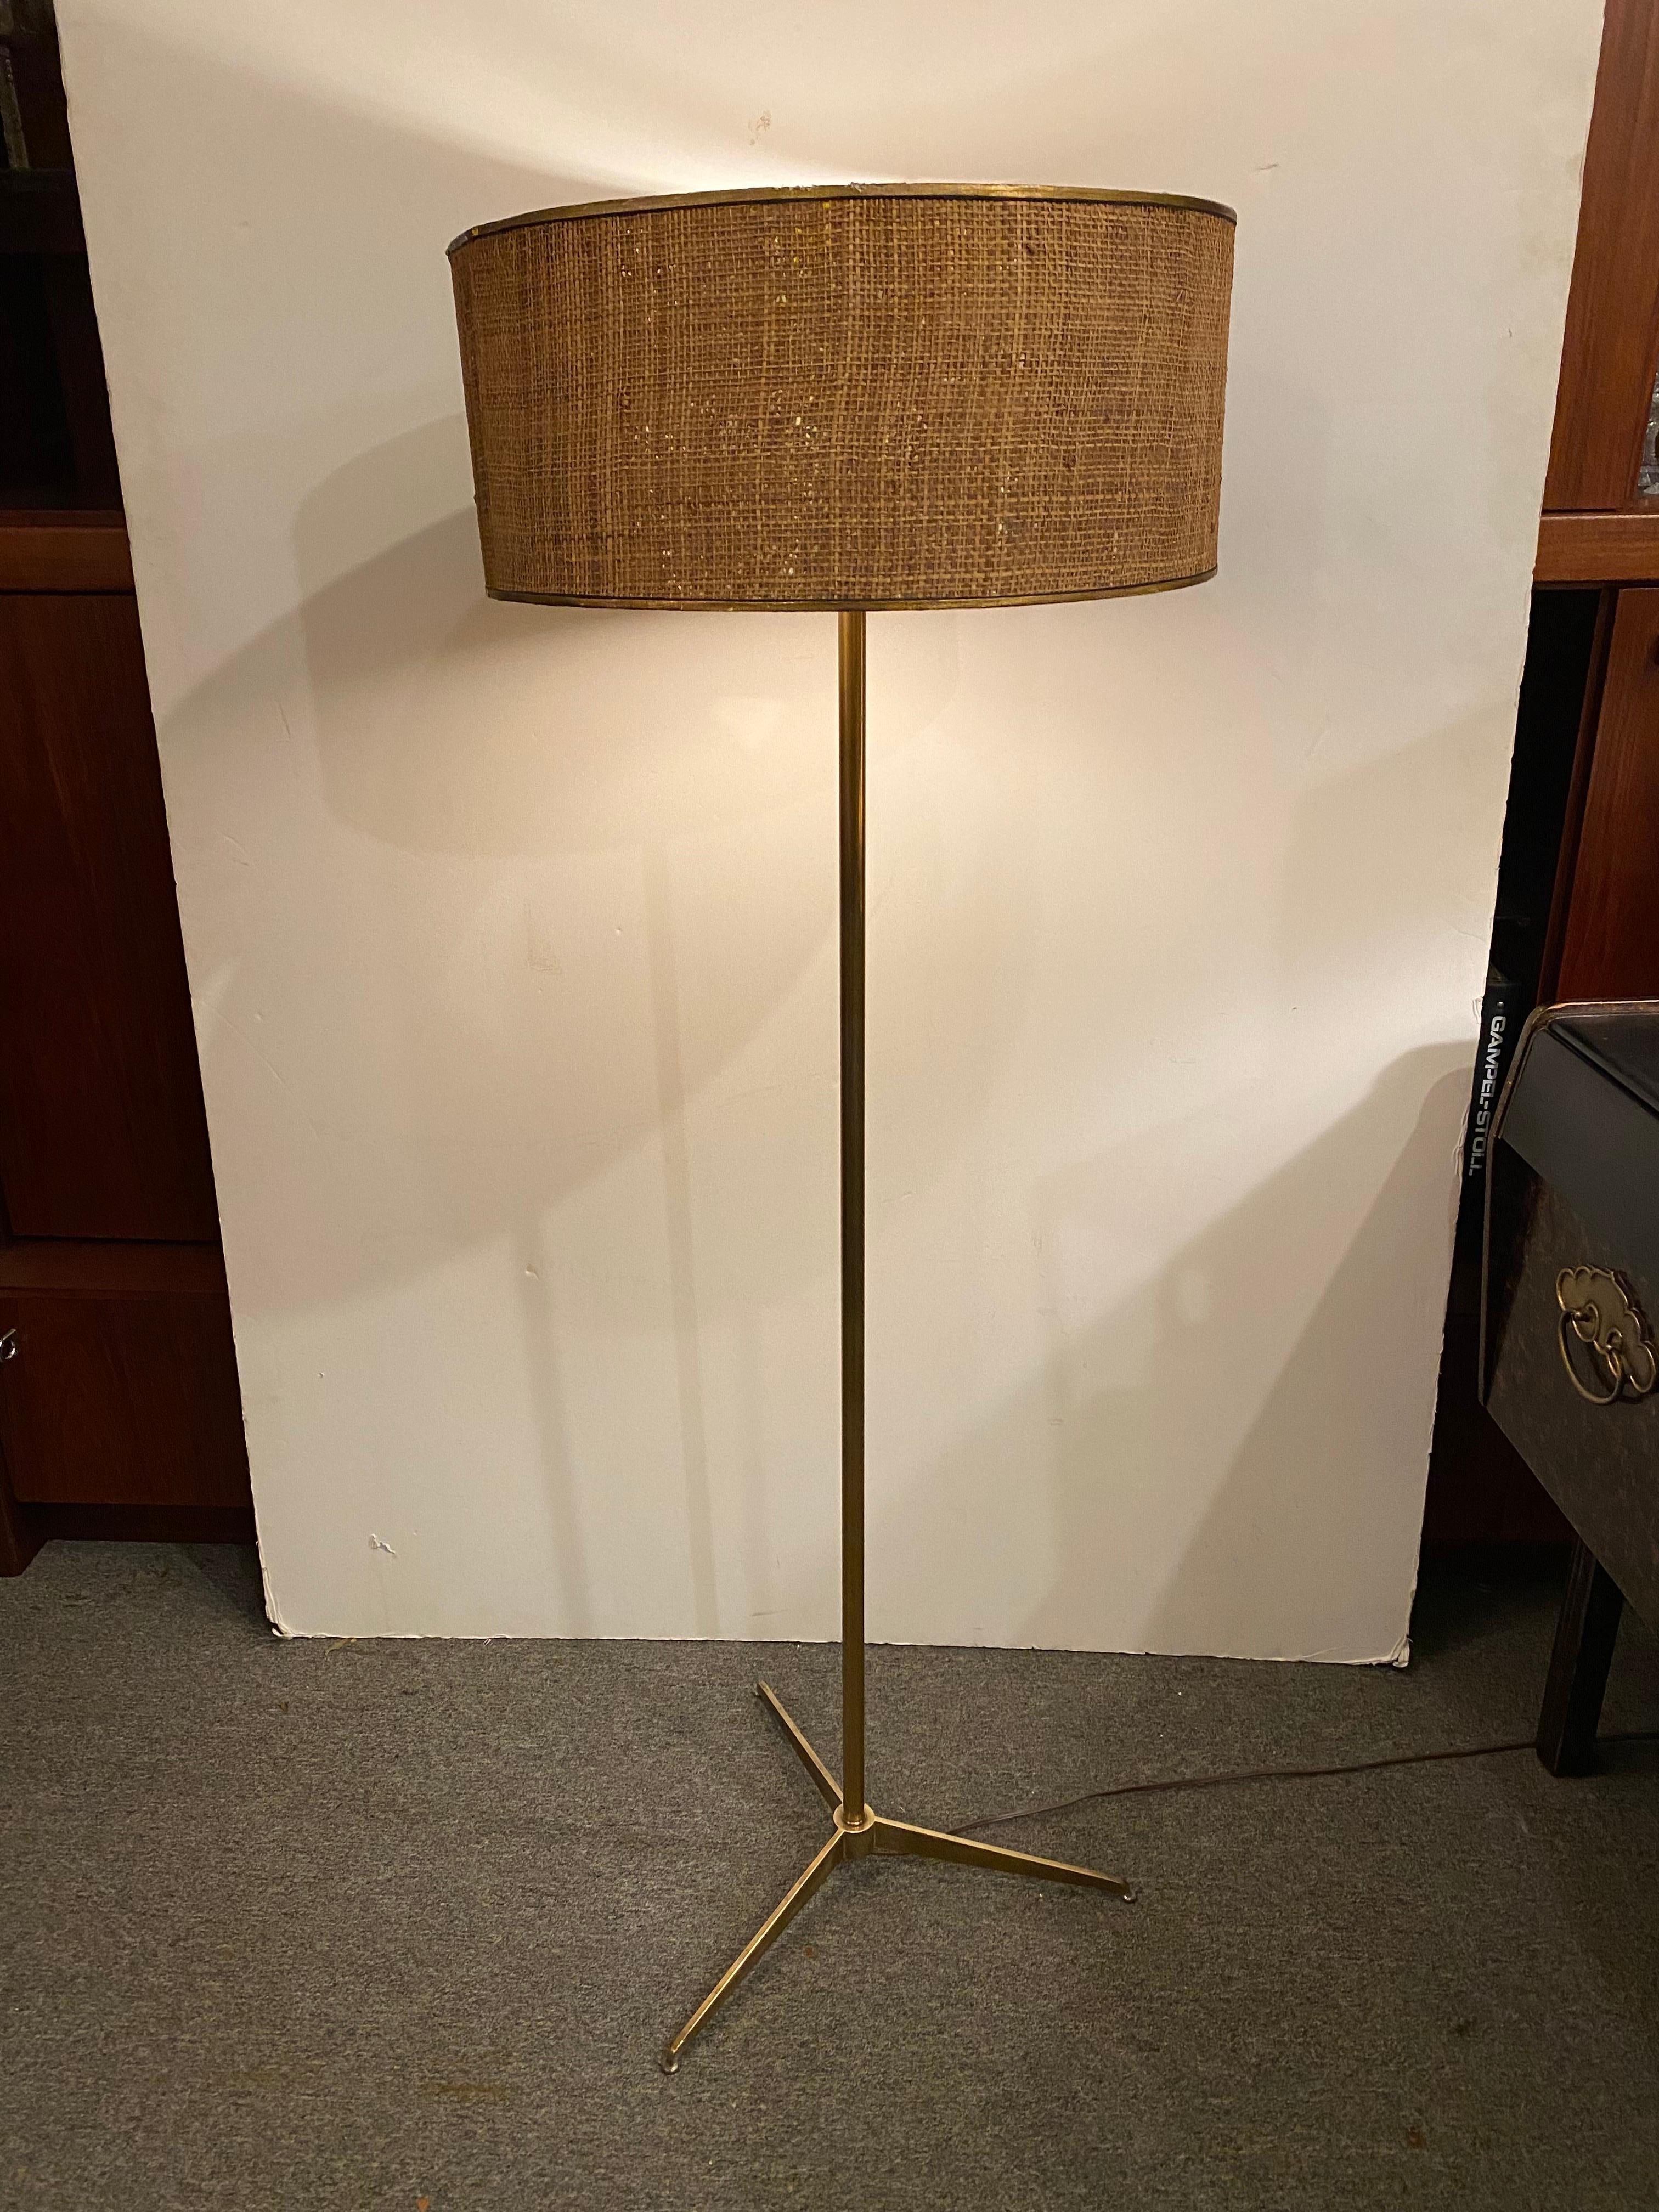 Lightolier Brass Tripod Floor Lamp.  3 way switch turns 1, 2, or all 3 bulbs on.  Still retains its plastic diffusor.  Looks very much like some of the McCobb designs that were produced in the 1950's, but this has the typical lightolier switch and